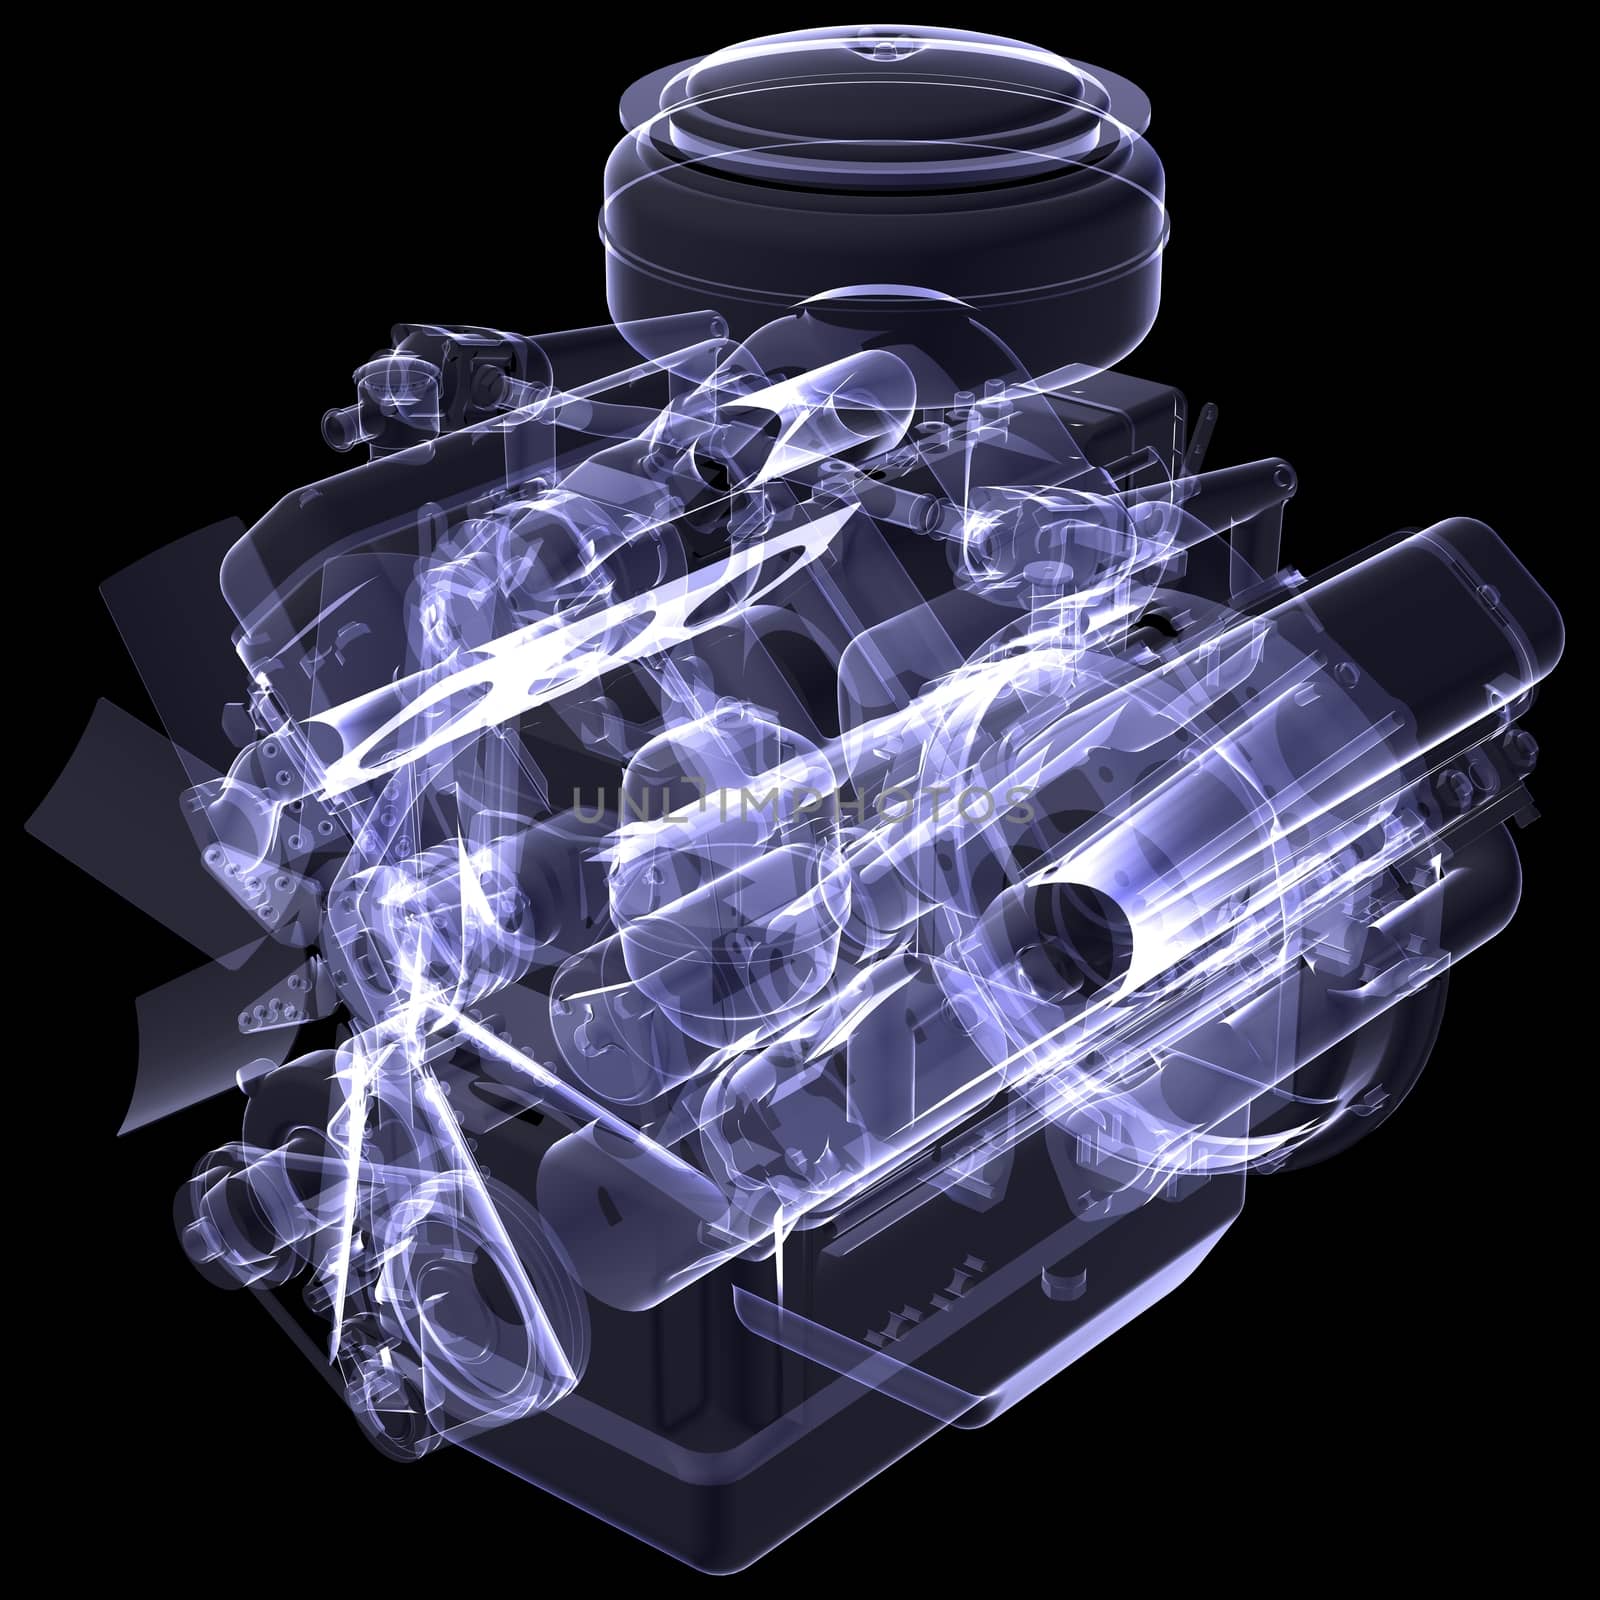 Diesel engine. X-ray render isolated on black background